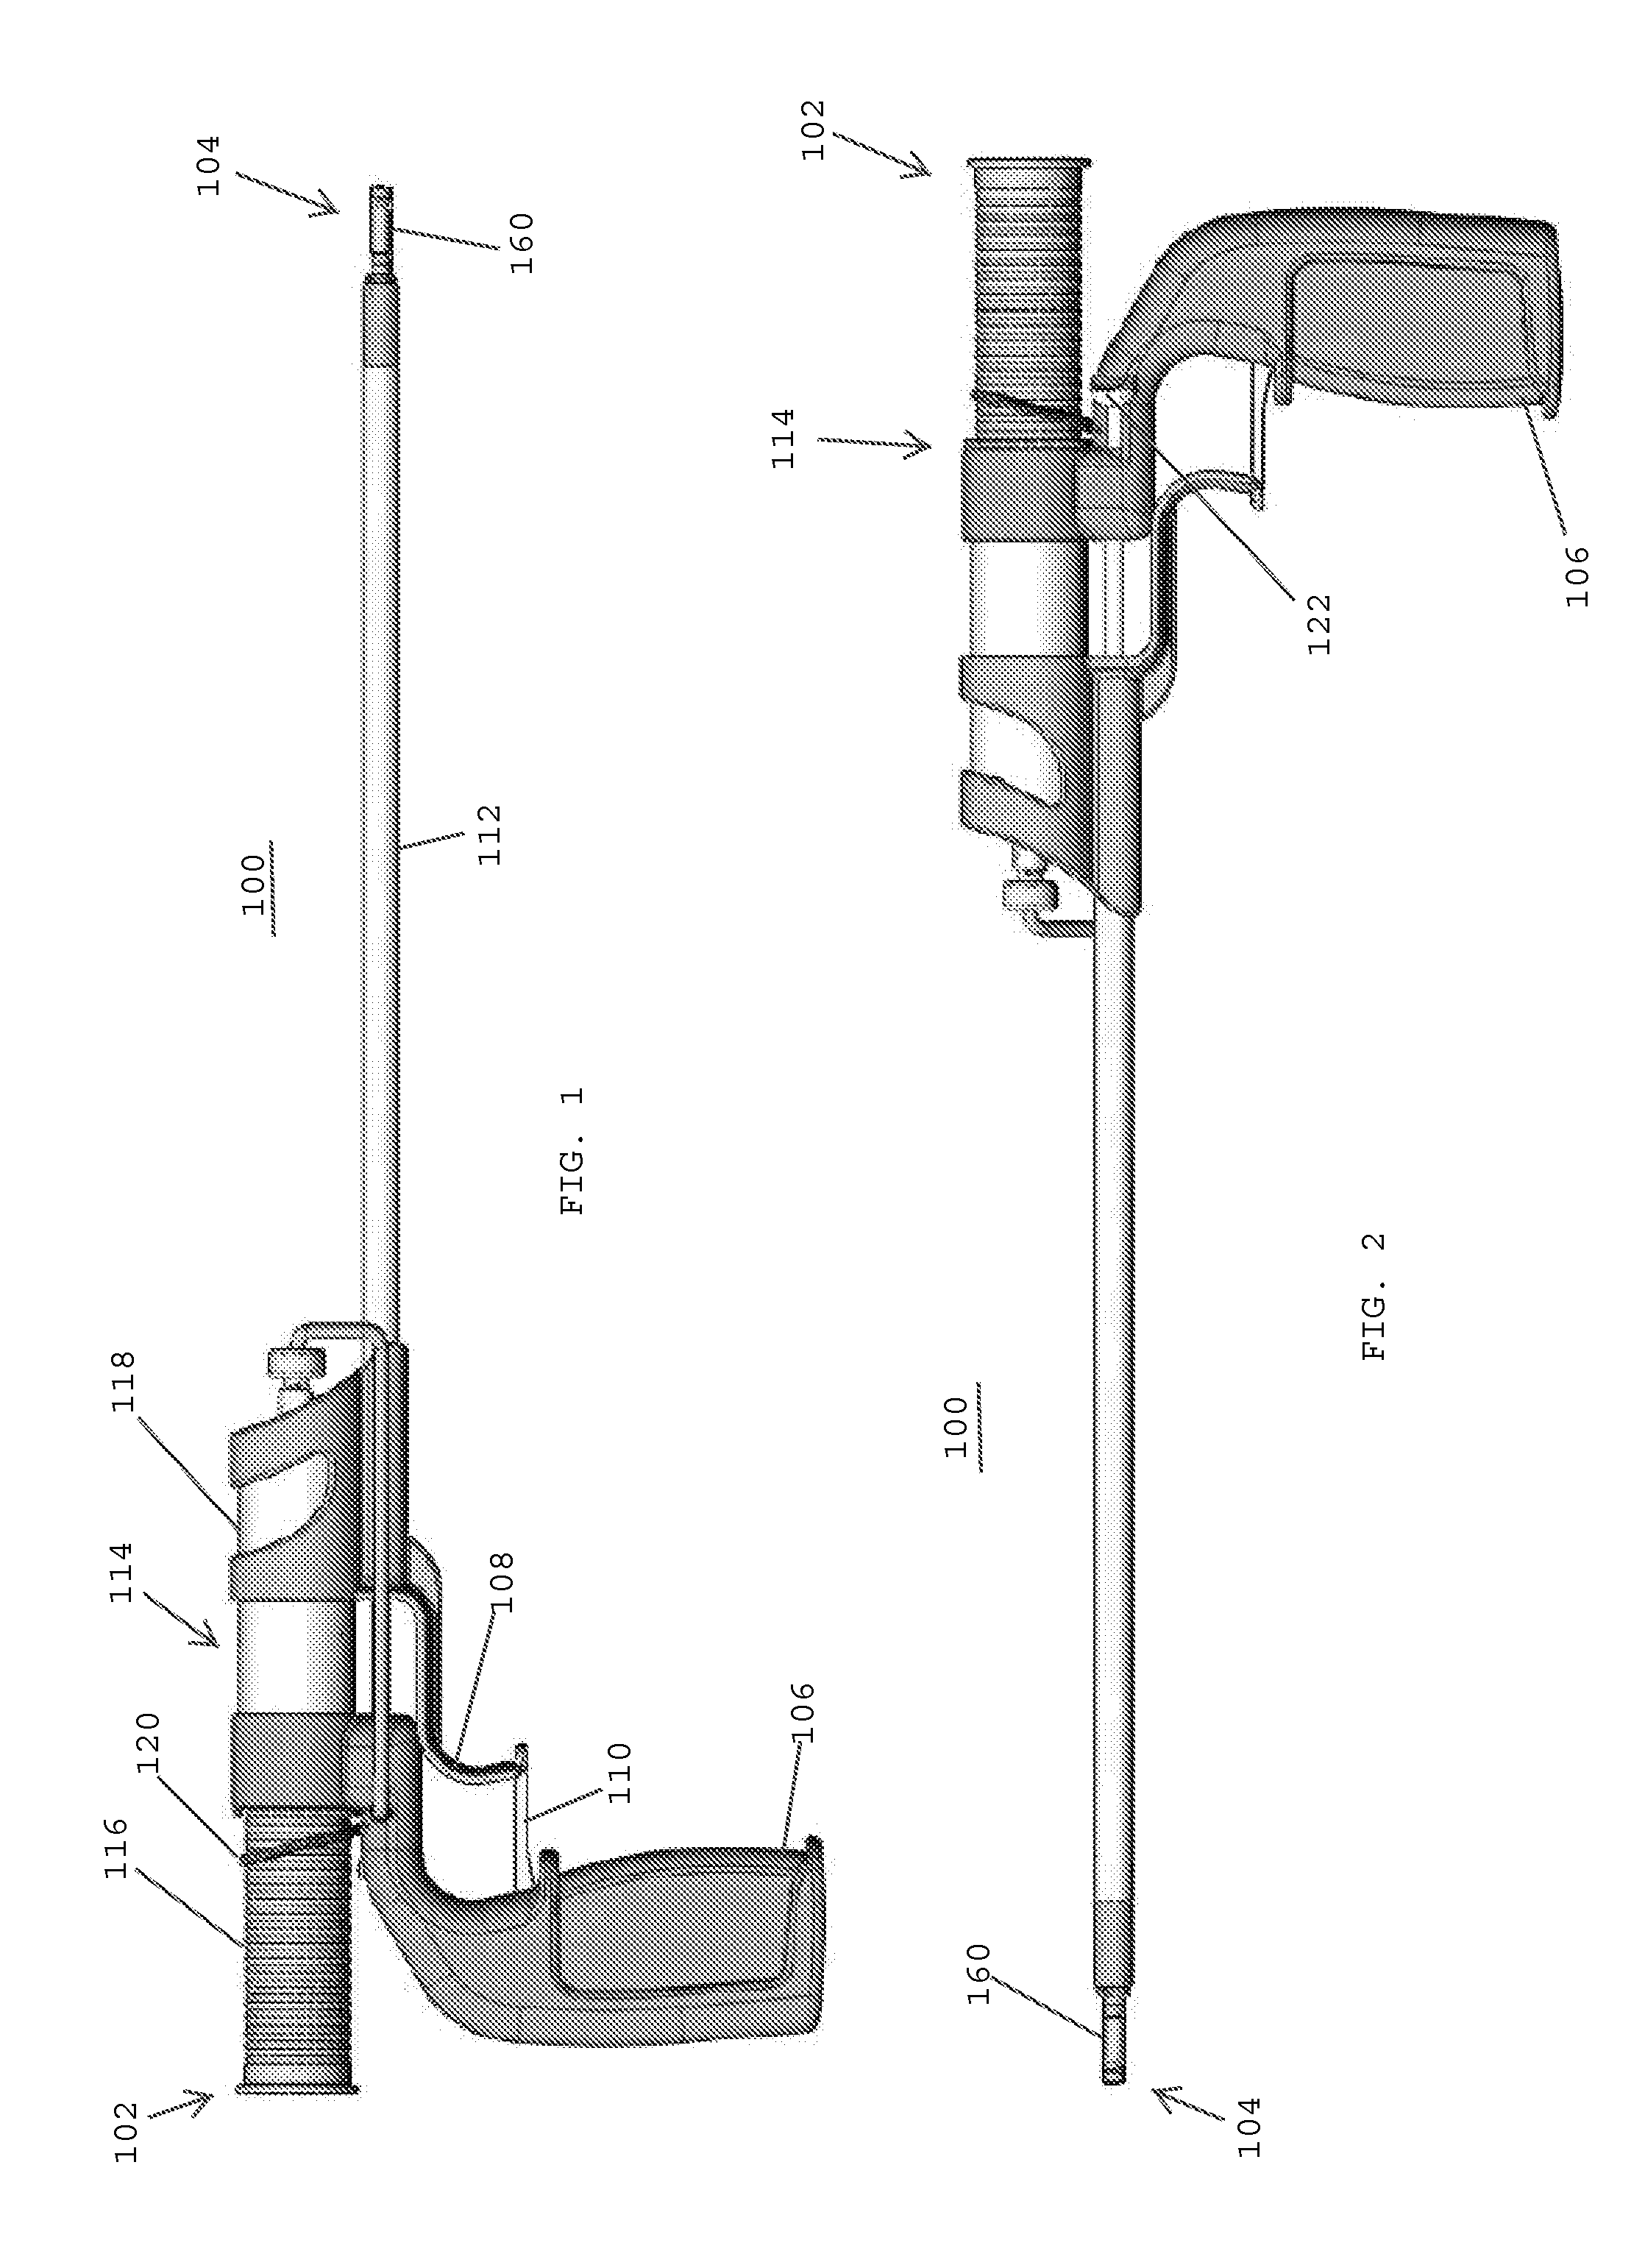 Applicator instruments having protective carriers for hemostats and methods therefor